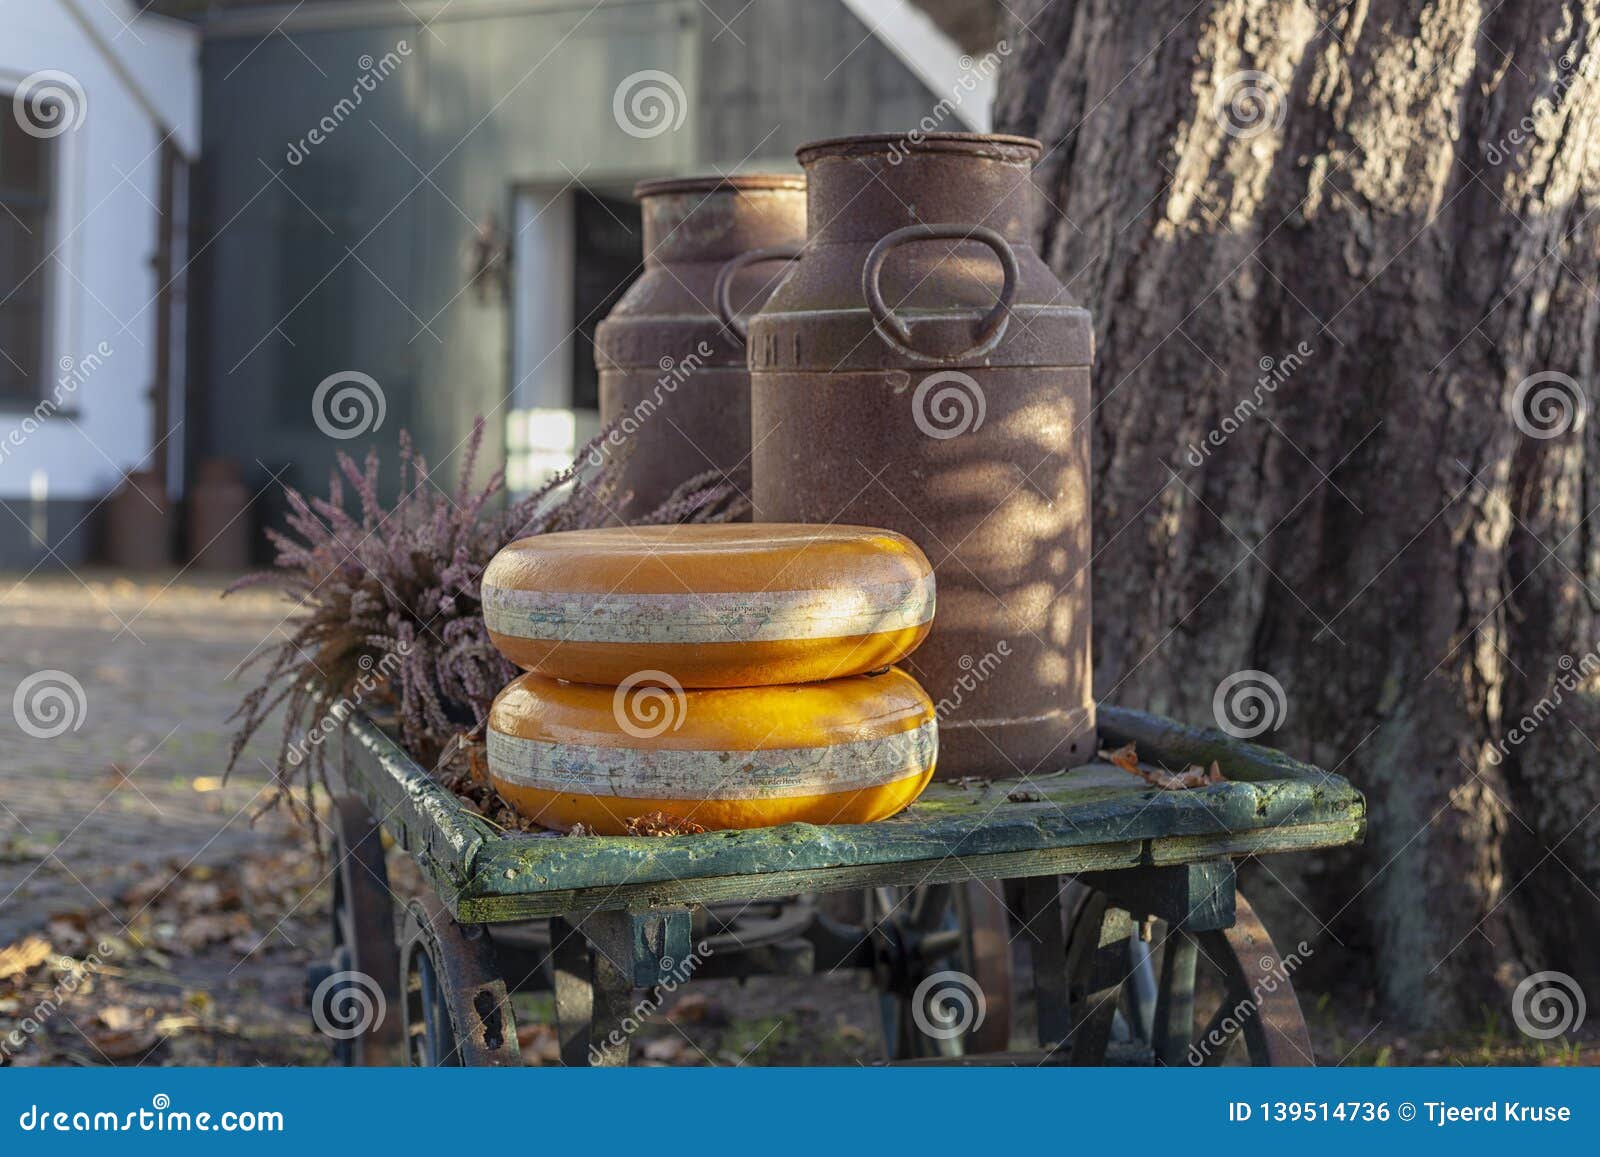 Two Whole Cheese Wheels Outside of an Old Barn Stock Photo - Image of